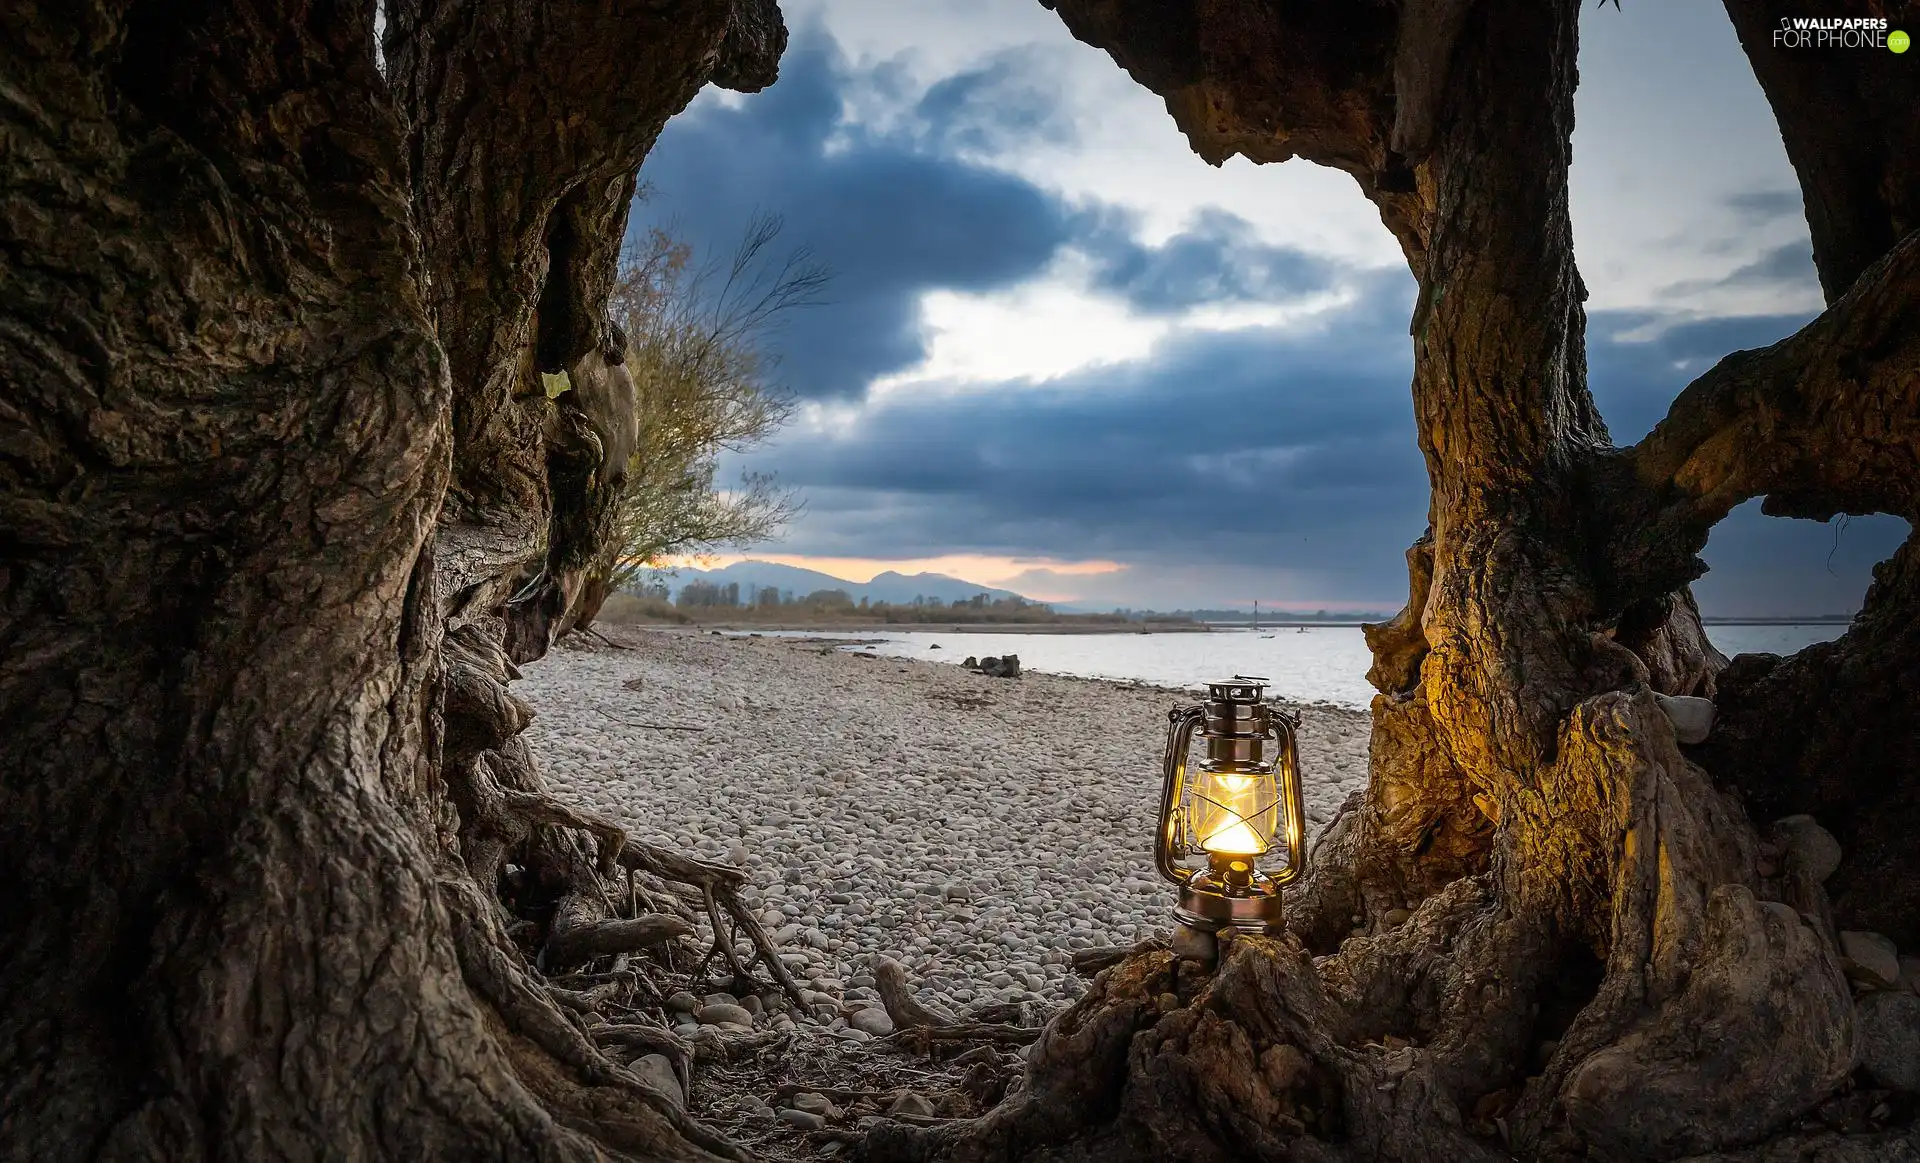 Beaches, roots, sea, Lamp, trees, Stones, clouds